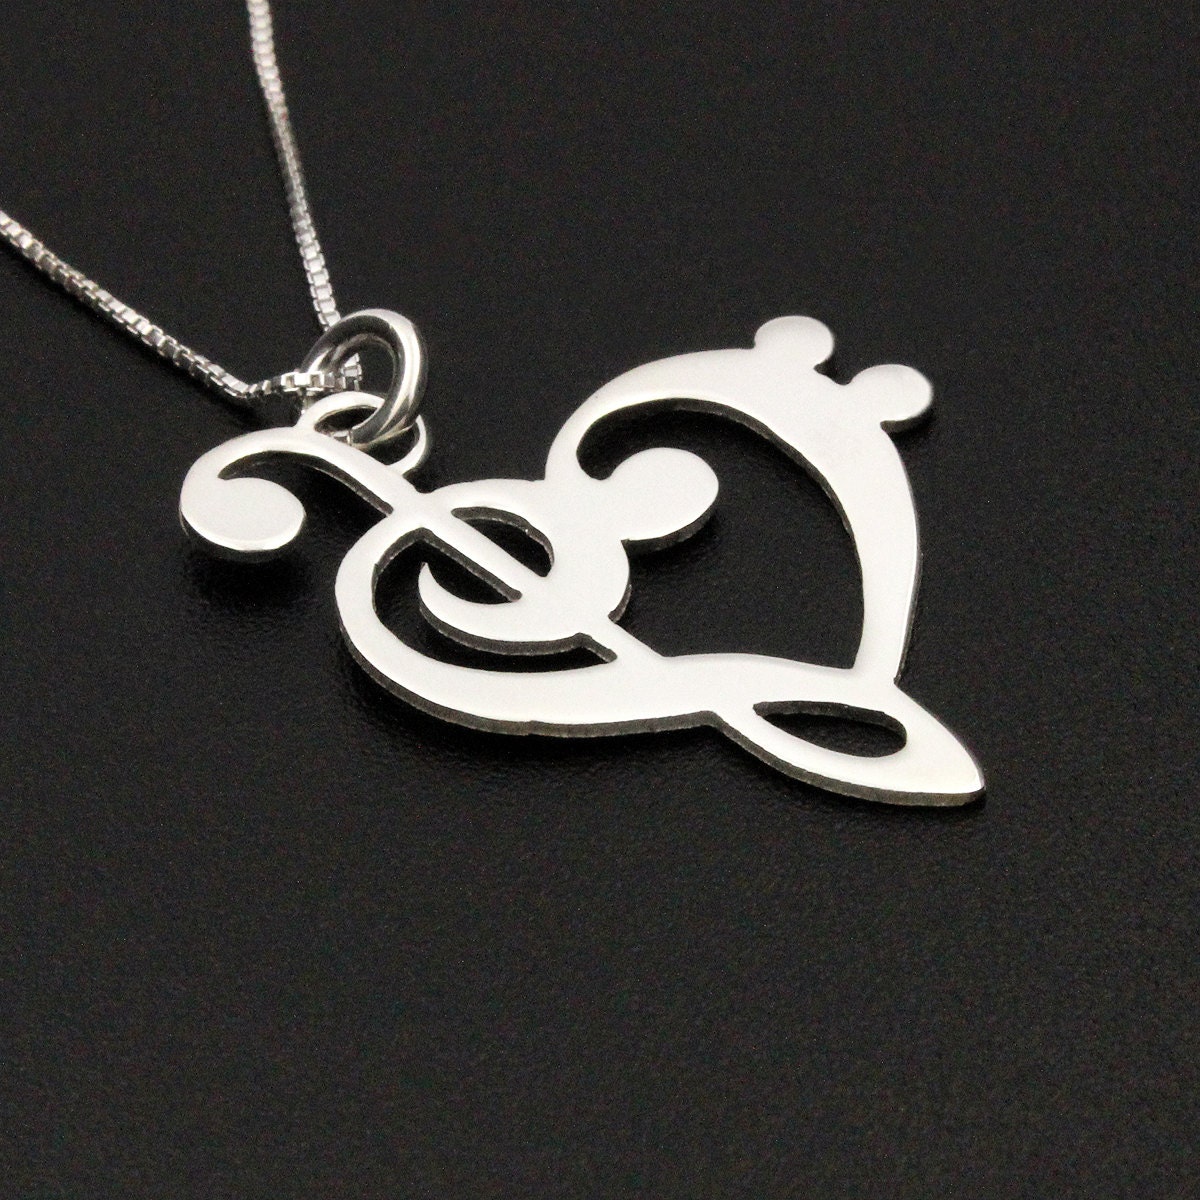 music note necklace G clef bass clef heart Necklace silver music note Treble clef Pendant charm necklace 20" inches Sterling Silver Chain - Silversmith925